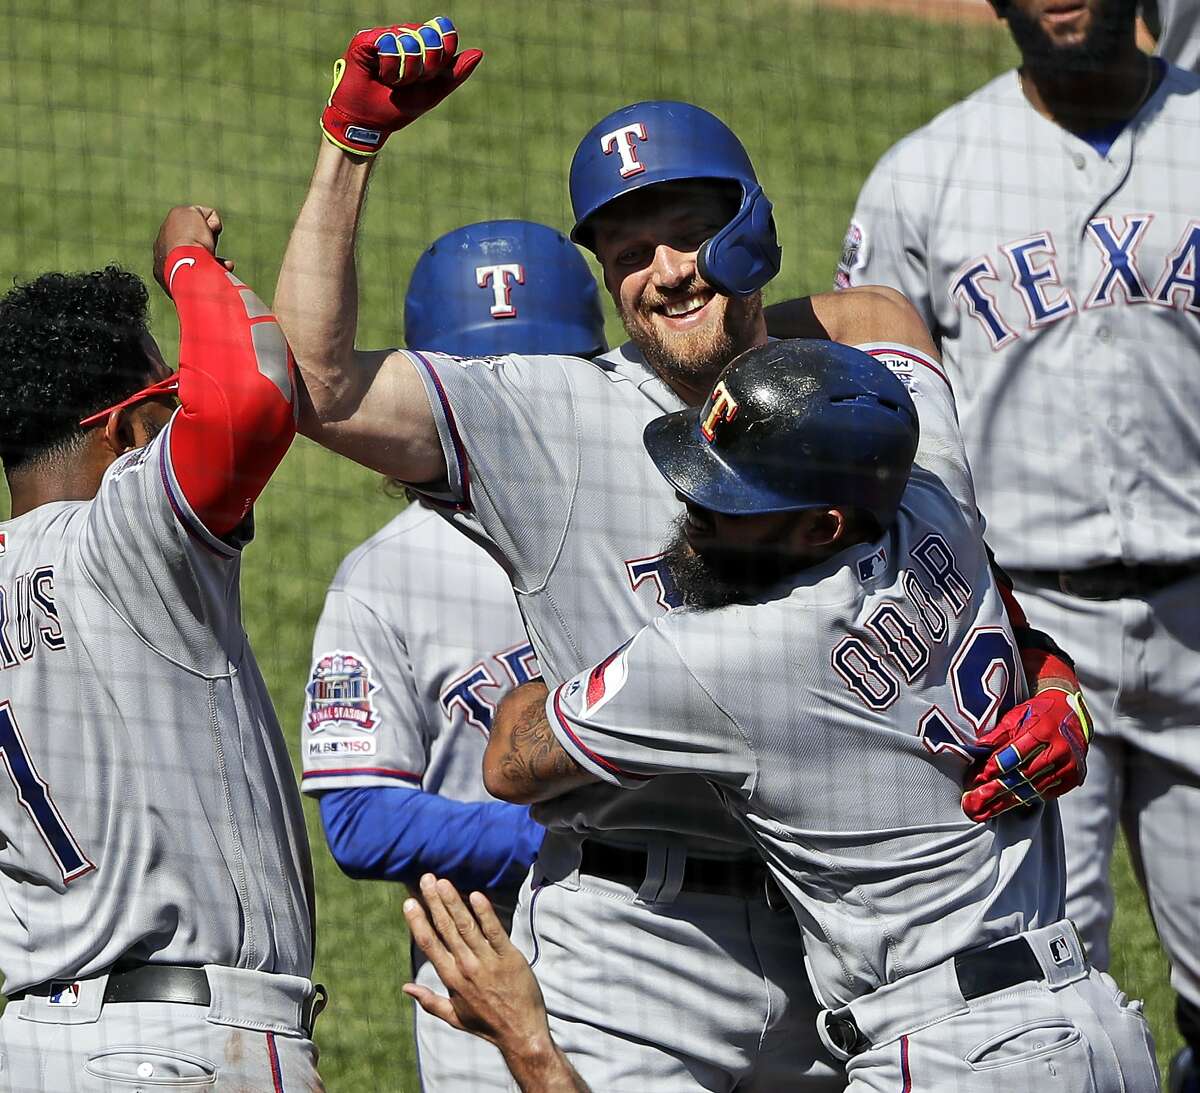 Texas Rangers' Hunter Pence, center, is congratulated by Rougned Odor (12) and Elvis Andrus (1) as he returns to the dugout after hitting a grand slam off Pittsburgh Pirates relief pitcher Michael Feliz during the eighth inning of a baseball game in Pittsburgh, Wednesday, May 8, 2019. The Rangers won 9-6.(AP Photo/Gene J. Puskar)